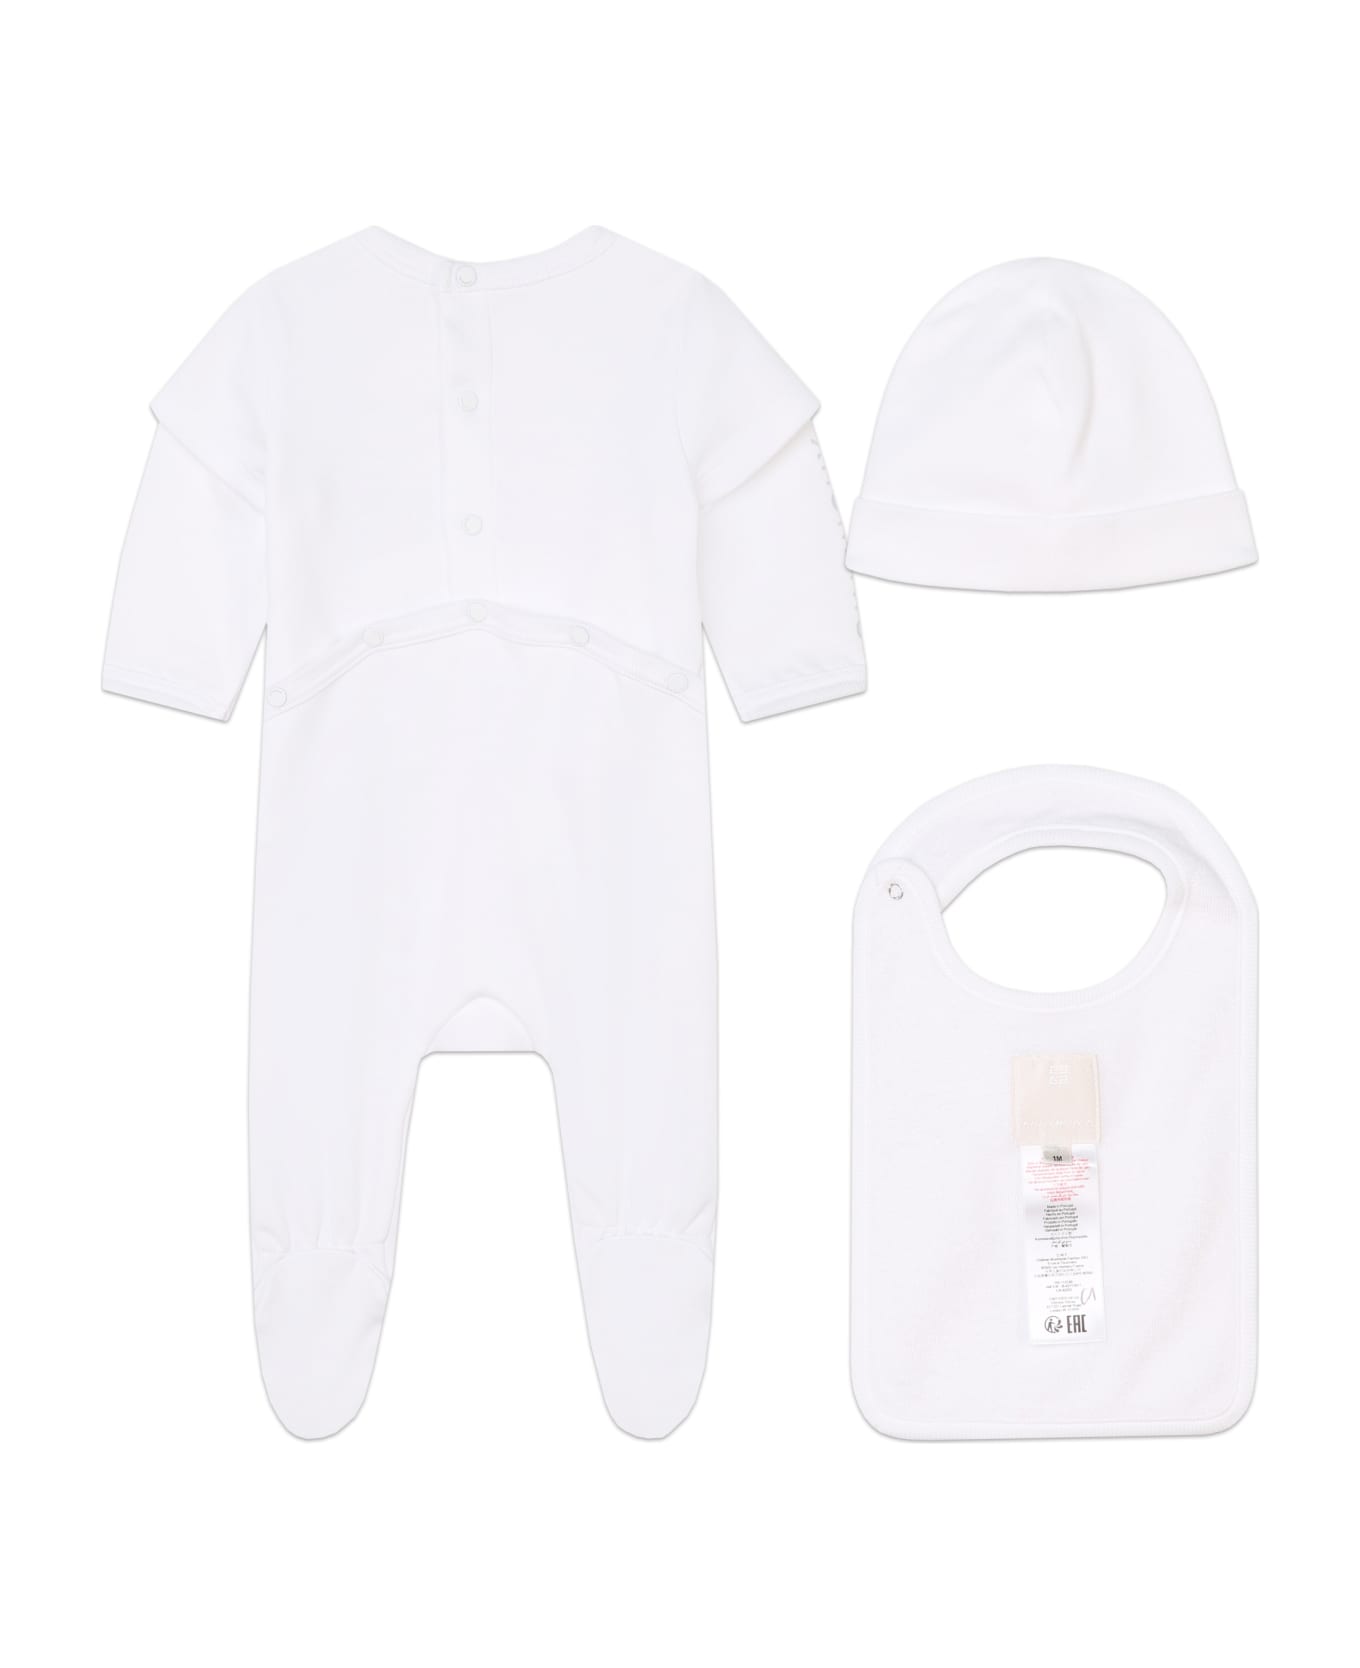 Givenchy 3-piece Baby Set With 4g Print - White ボディスーツ＆セットアップ